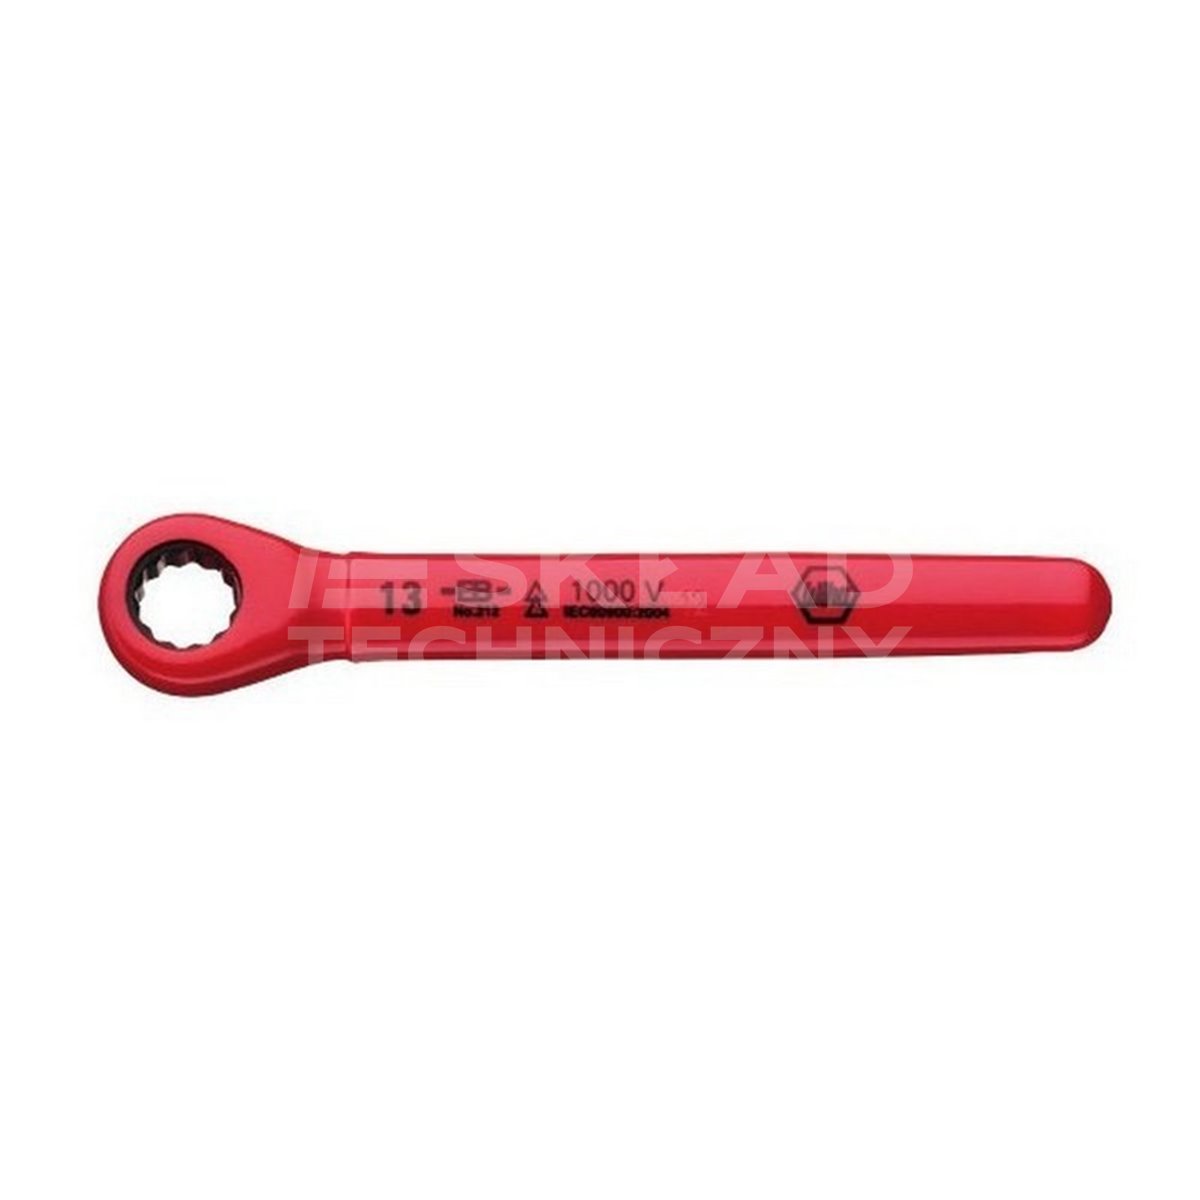 Insulated VDE Ratchet Open-End Wrench 5589N Wiha 36666.